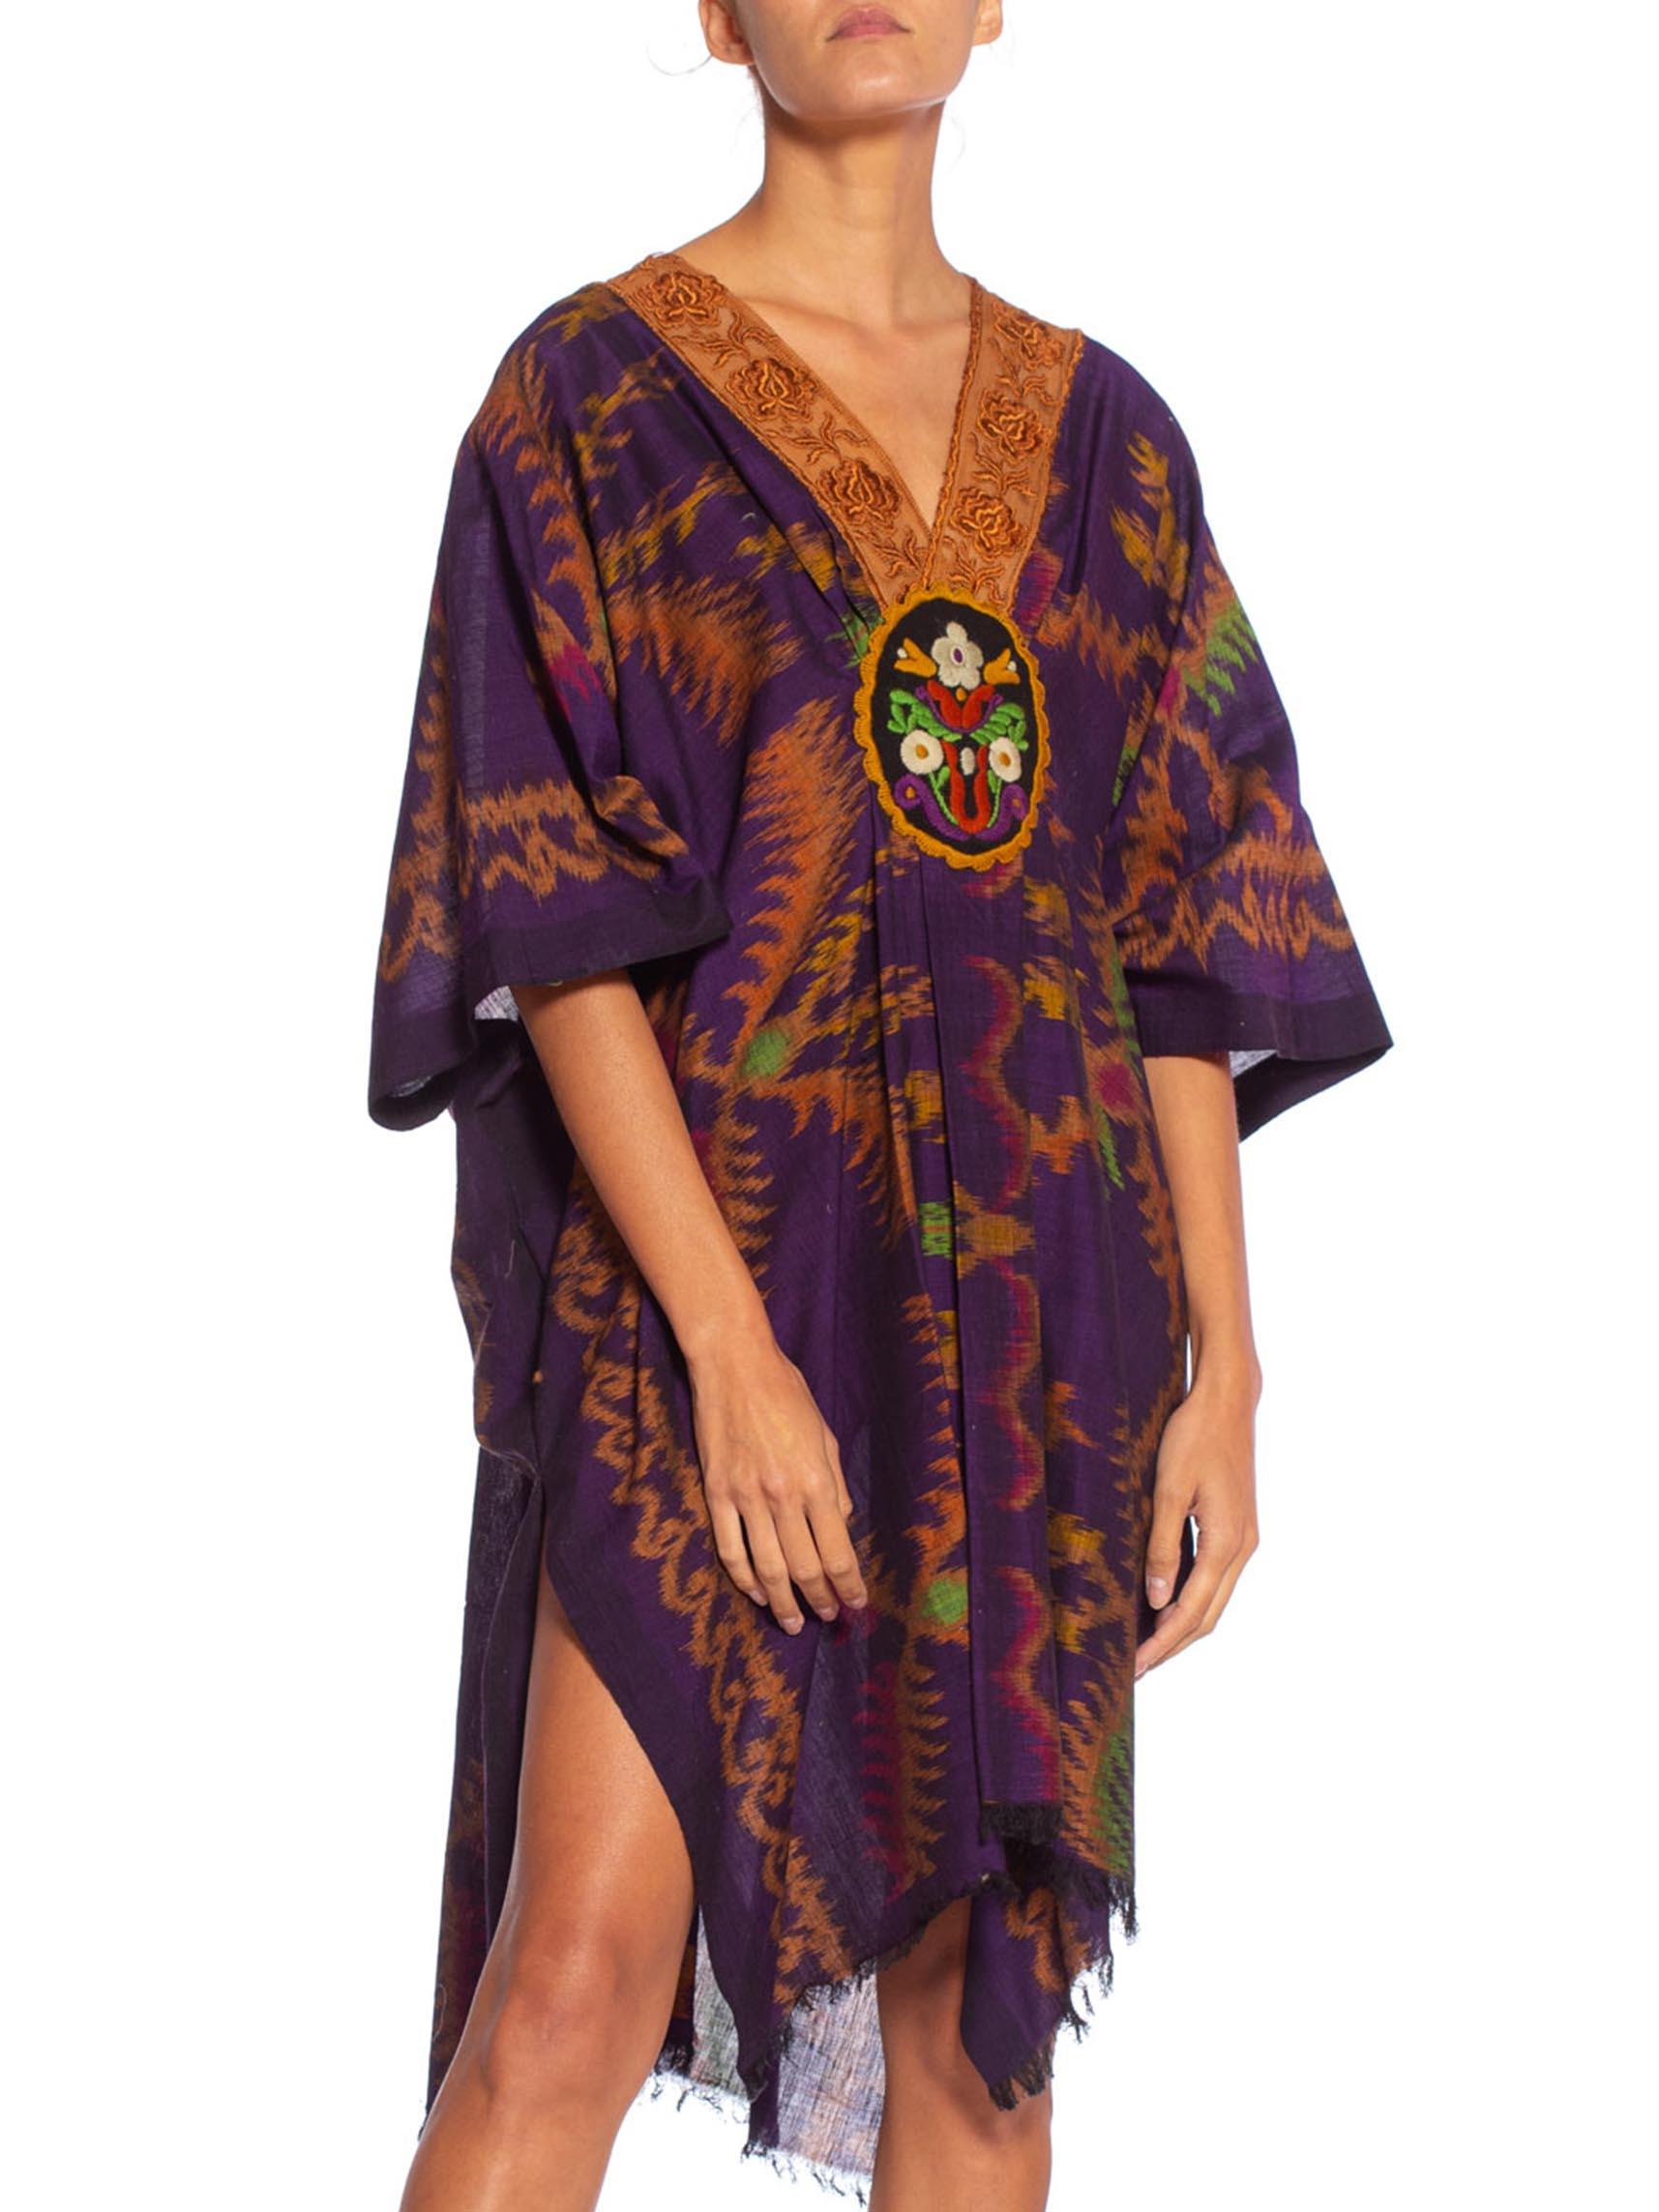 MORPHEW COLLECTION Purple & Brown Silk Ikat Kaftan Handmade With Victorian Lace Collar
MORPHEW COLLECTION is made entirely by hand in our NYC Ateliér of rare antique materials sourced from around the globe. Our sustainable vintage materials